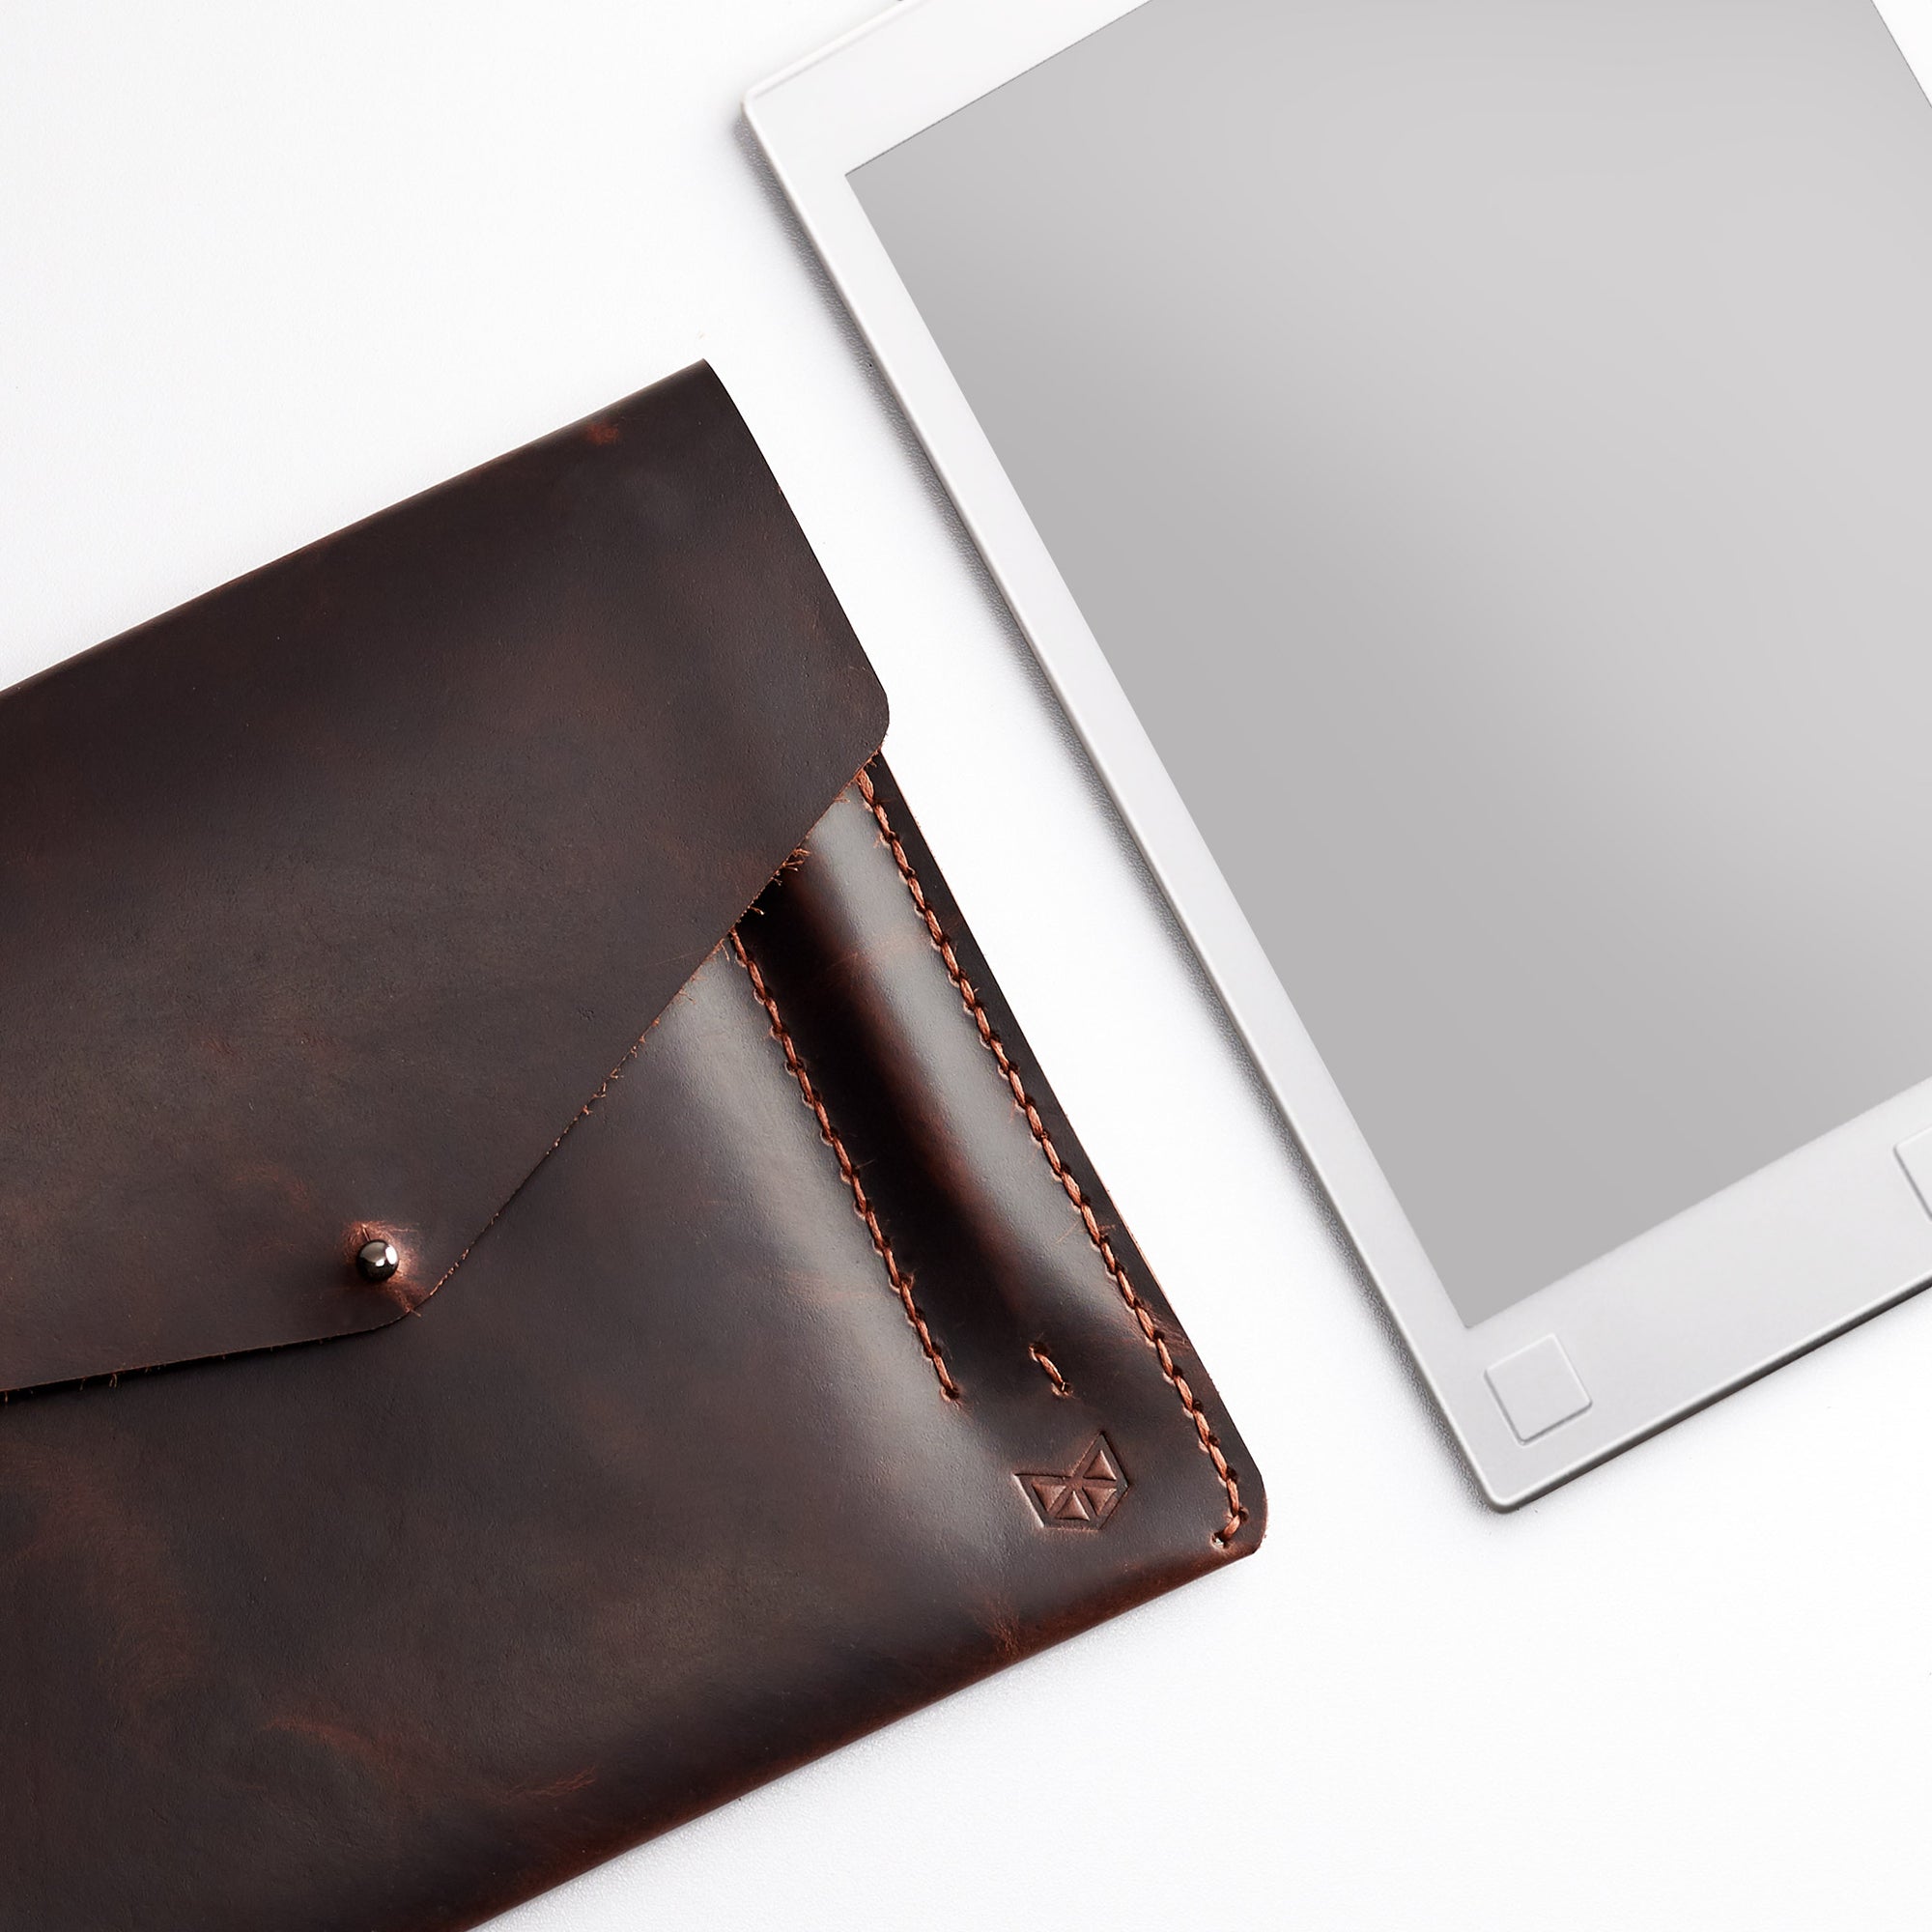 Style. Red Brown handcrafted leather reMarkable tablet case. Folio with Marker holder. Paper E-ink tablet minimalist sleeve design. 